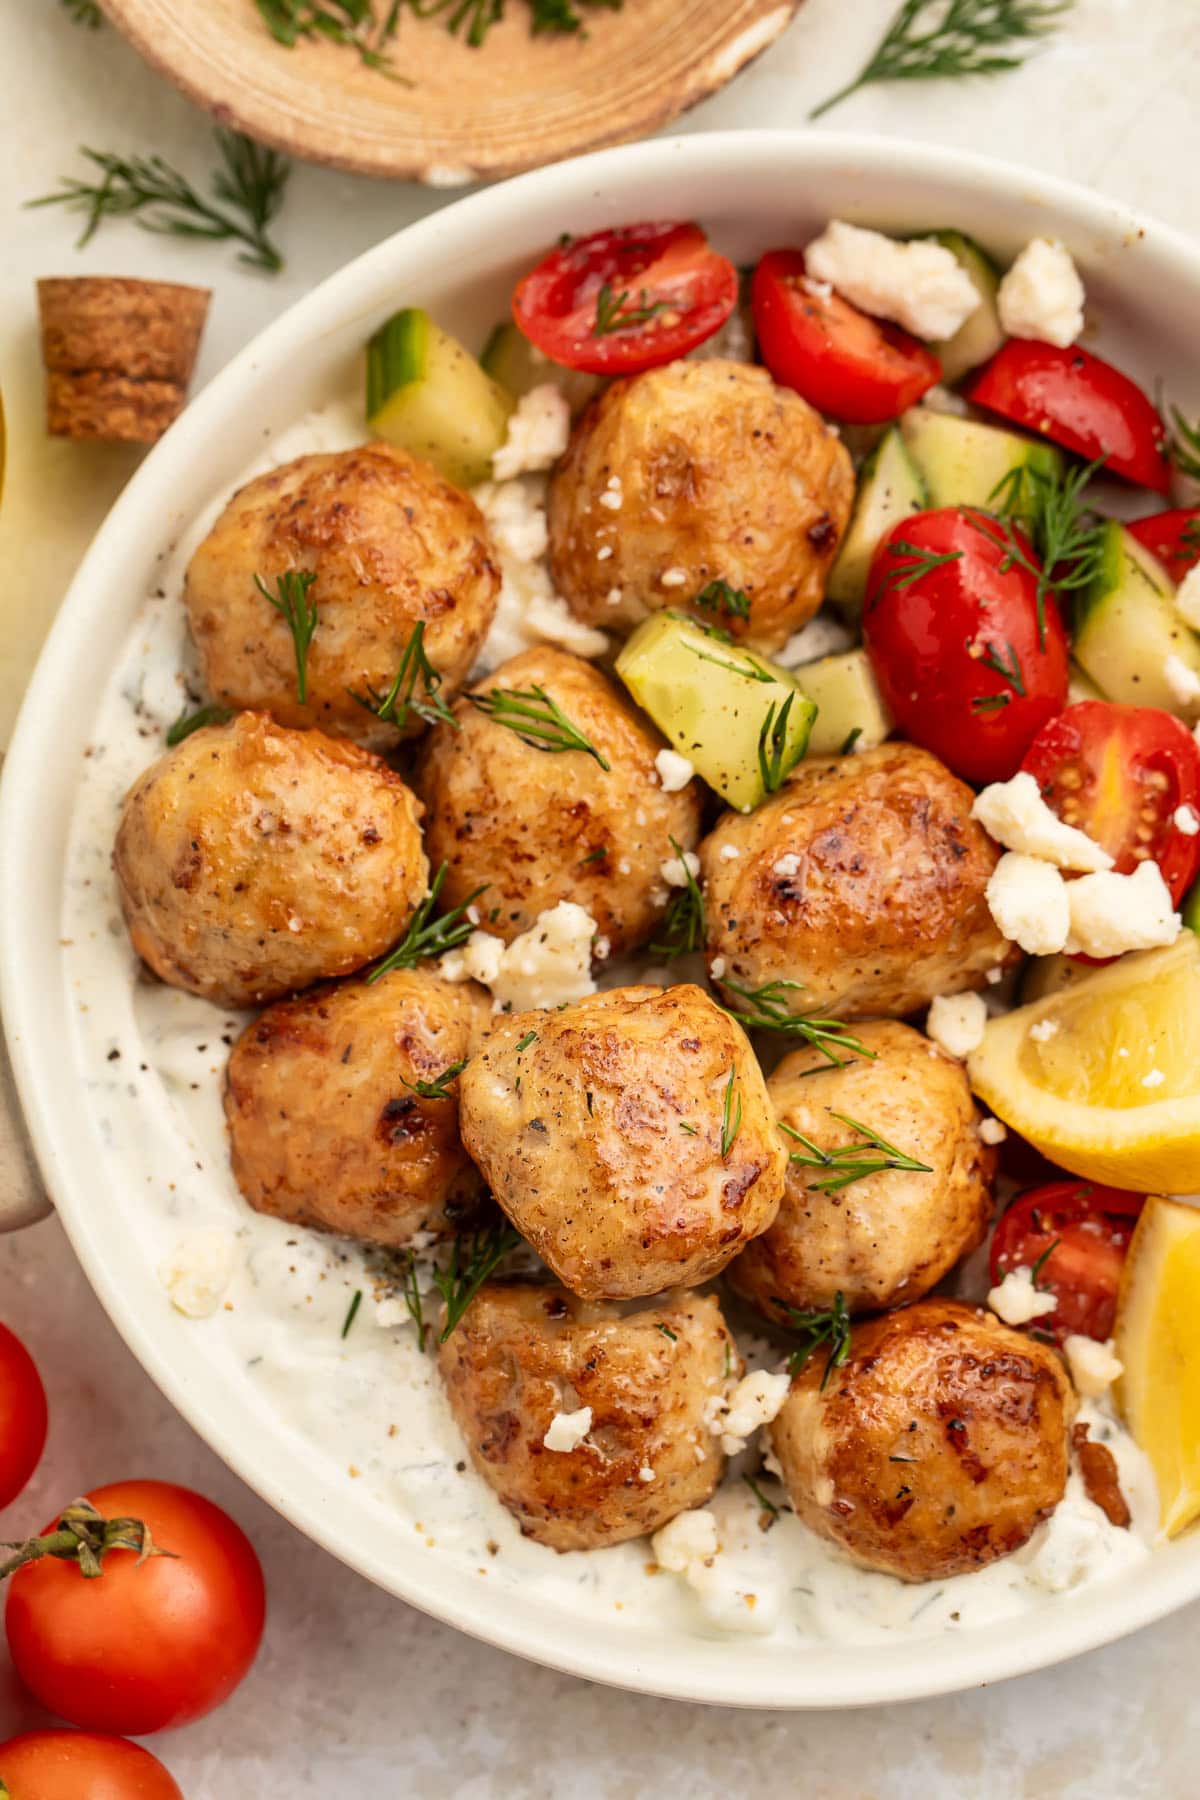 Top-down photo showing Greek chicken meatballs in a large bowl with rice, feta cheese, veggies, and herbs.